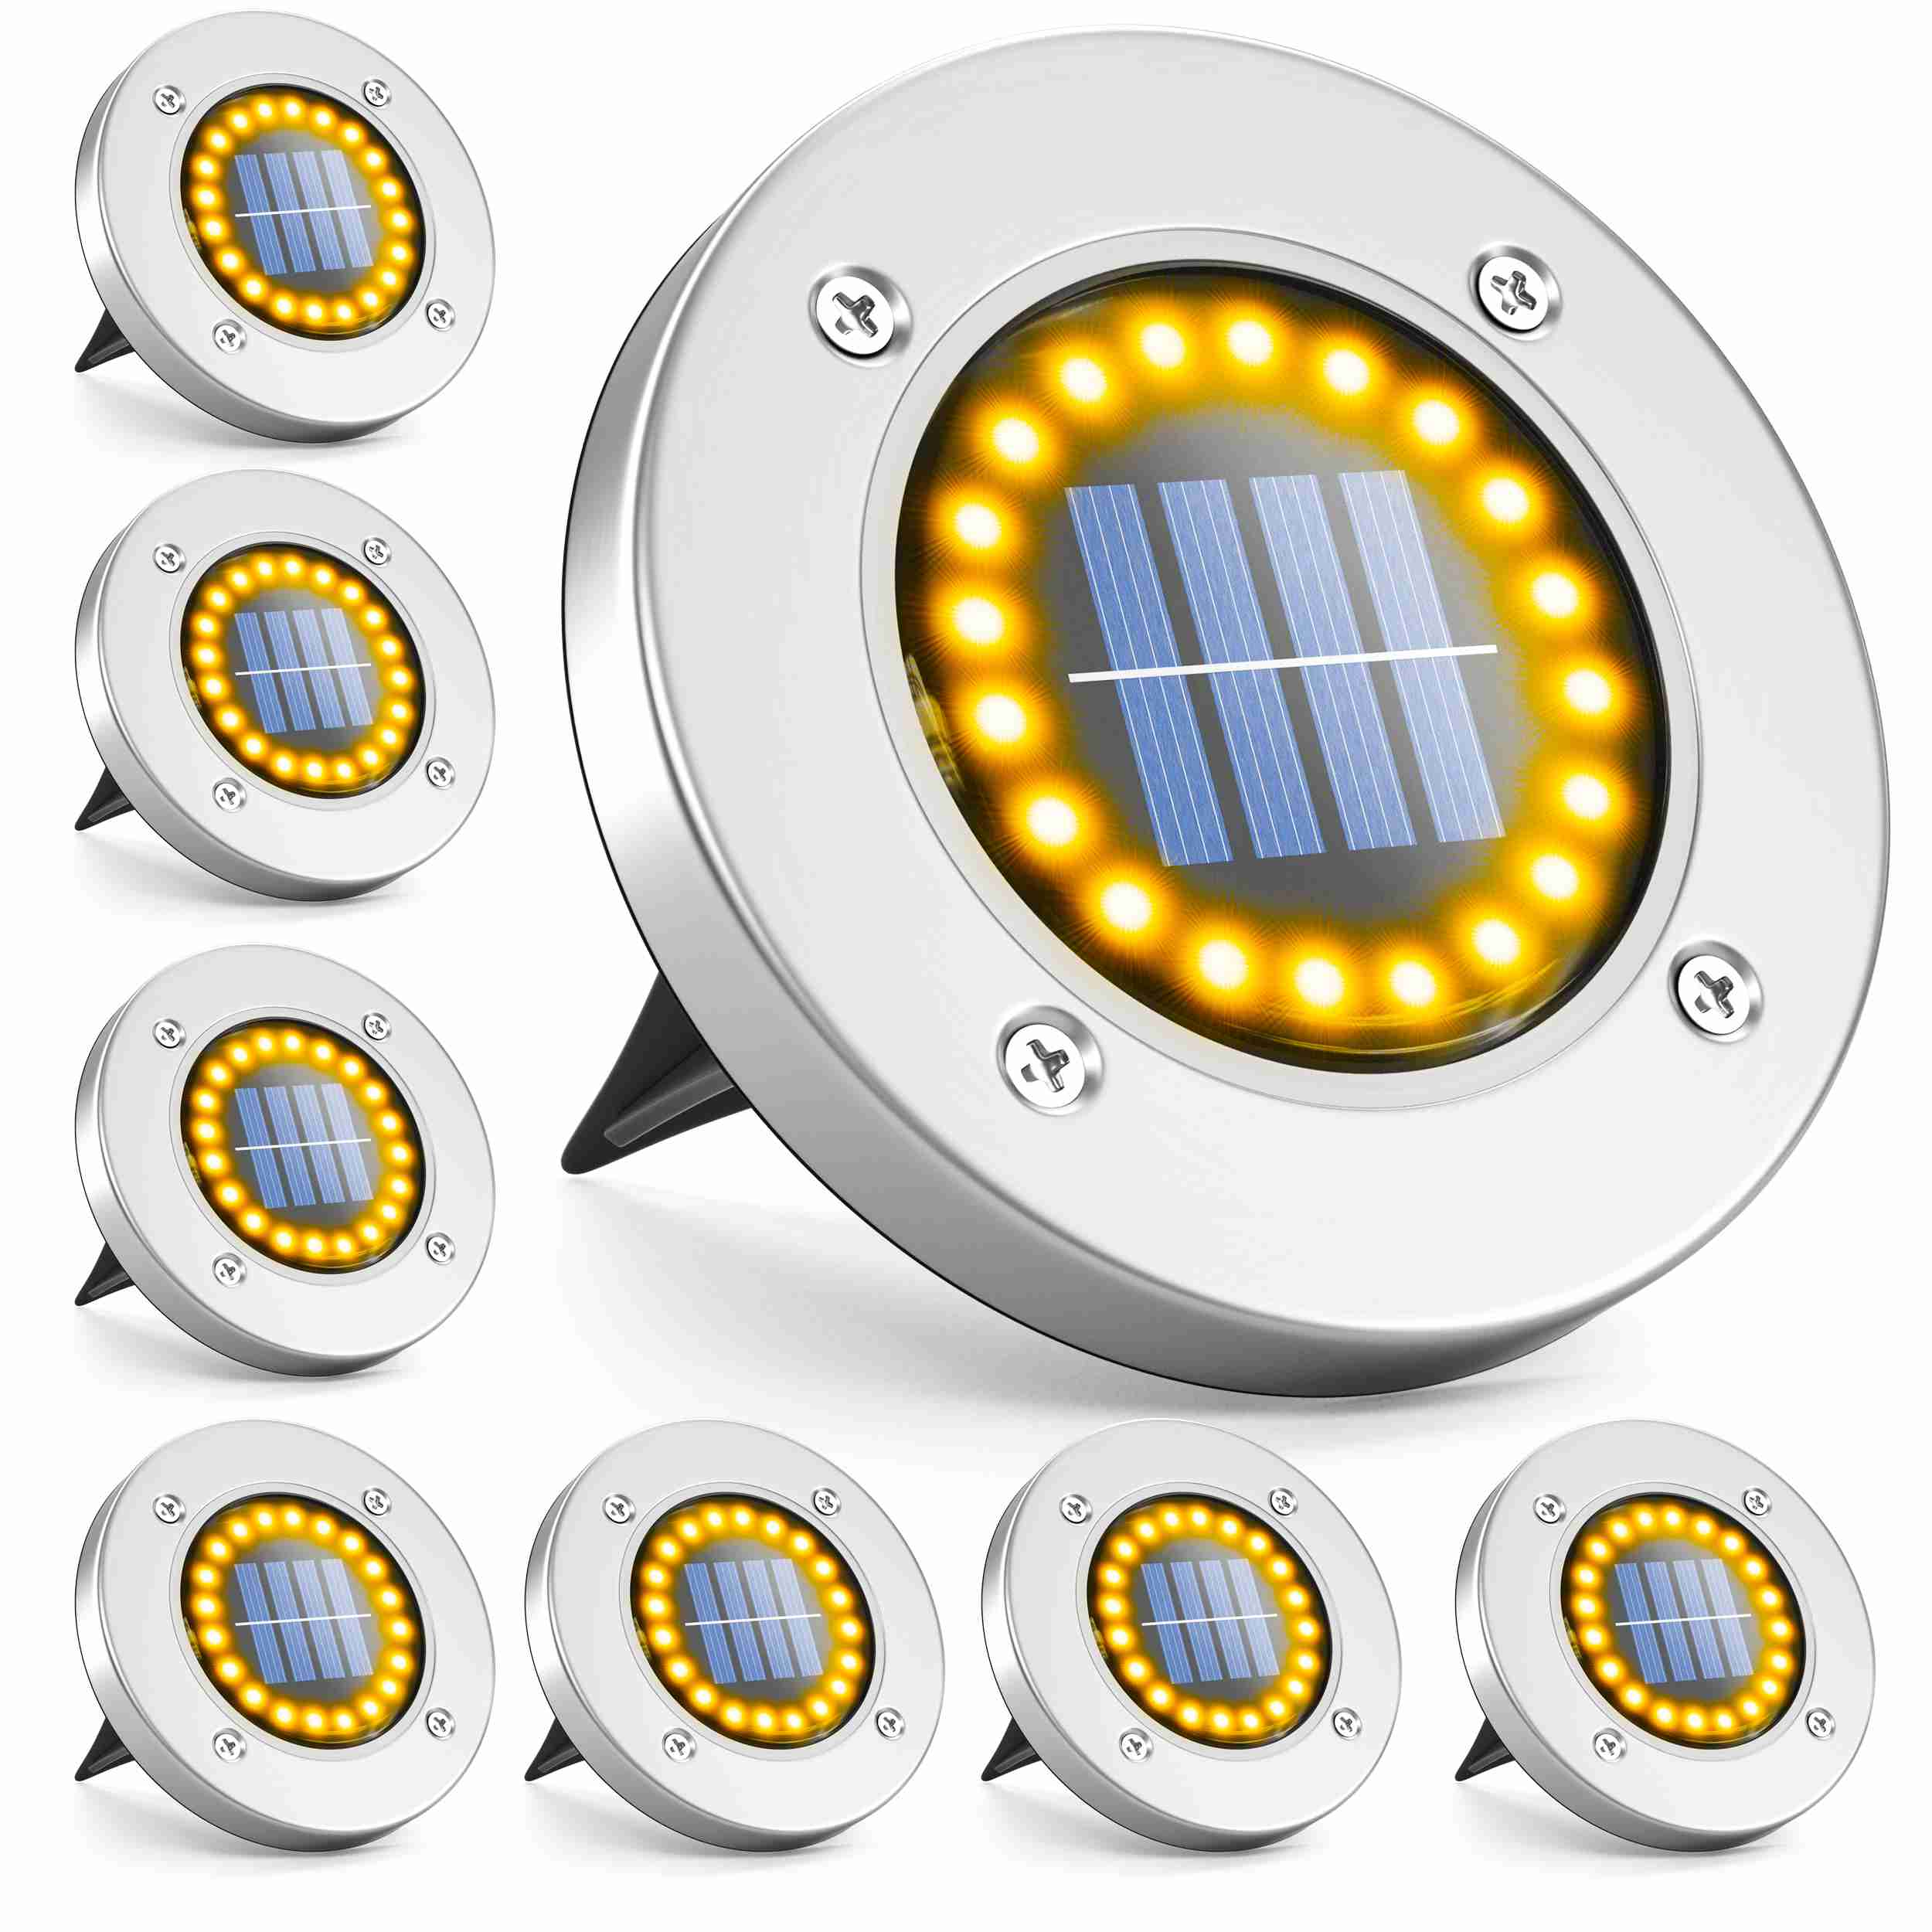 solarsy-outdoor-sola-lights-ground-lights-solar-path-pathway with cash back rebate